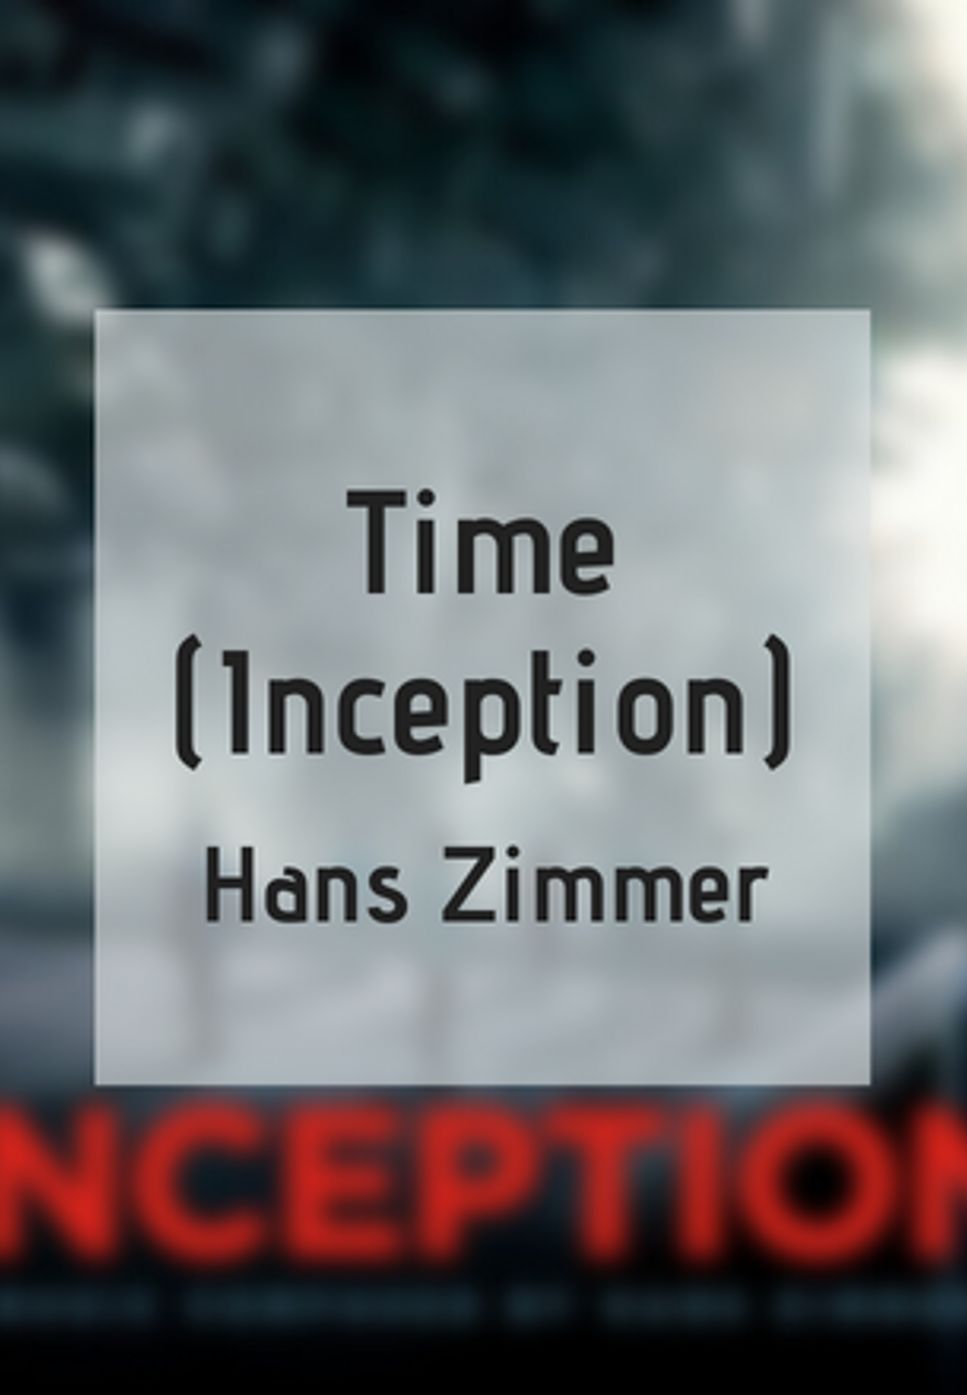 Hans Zimmer - Time (Inception) by GuestinPiano